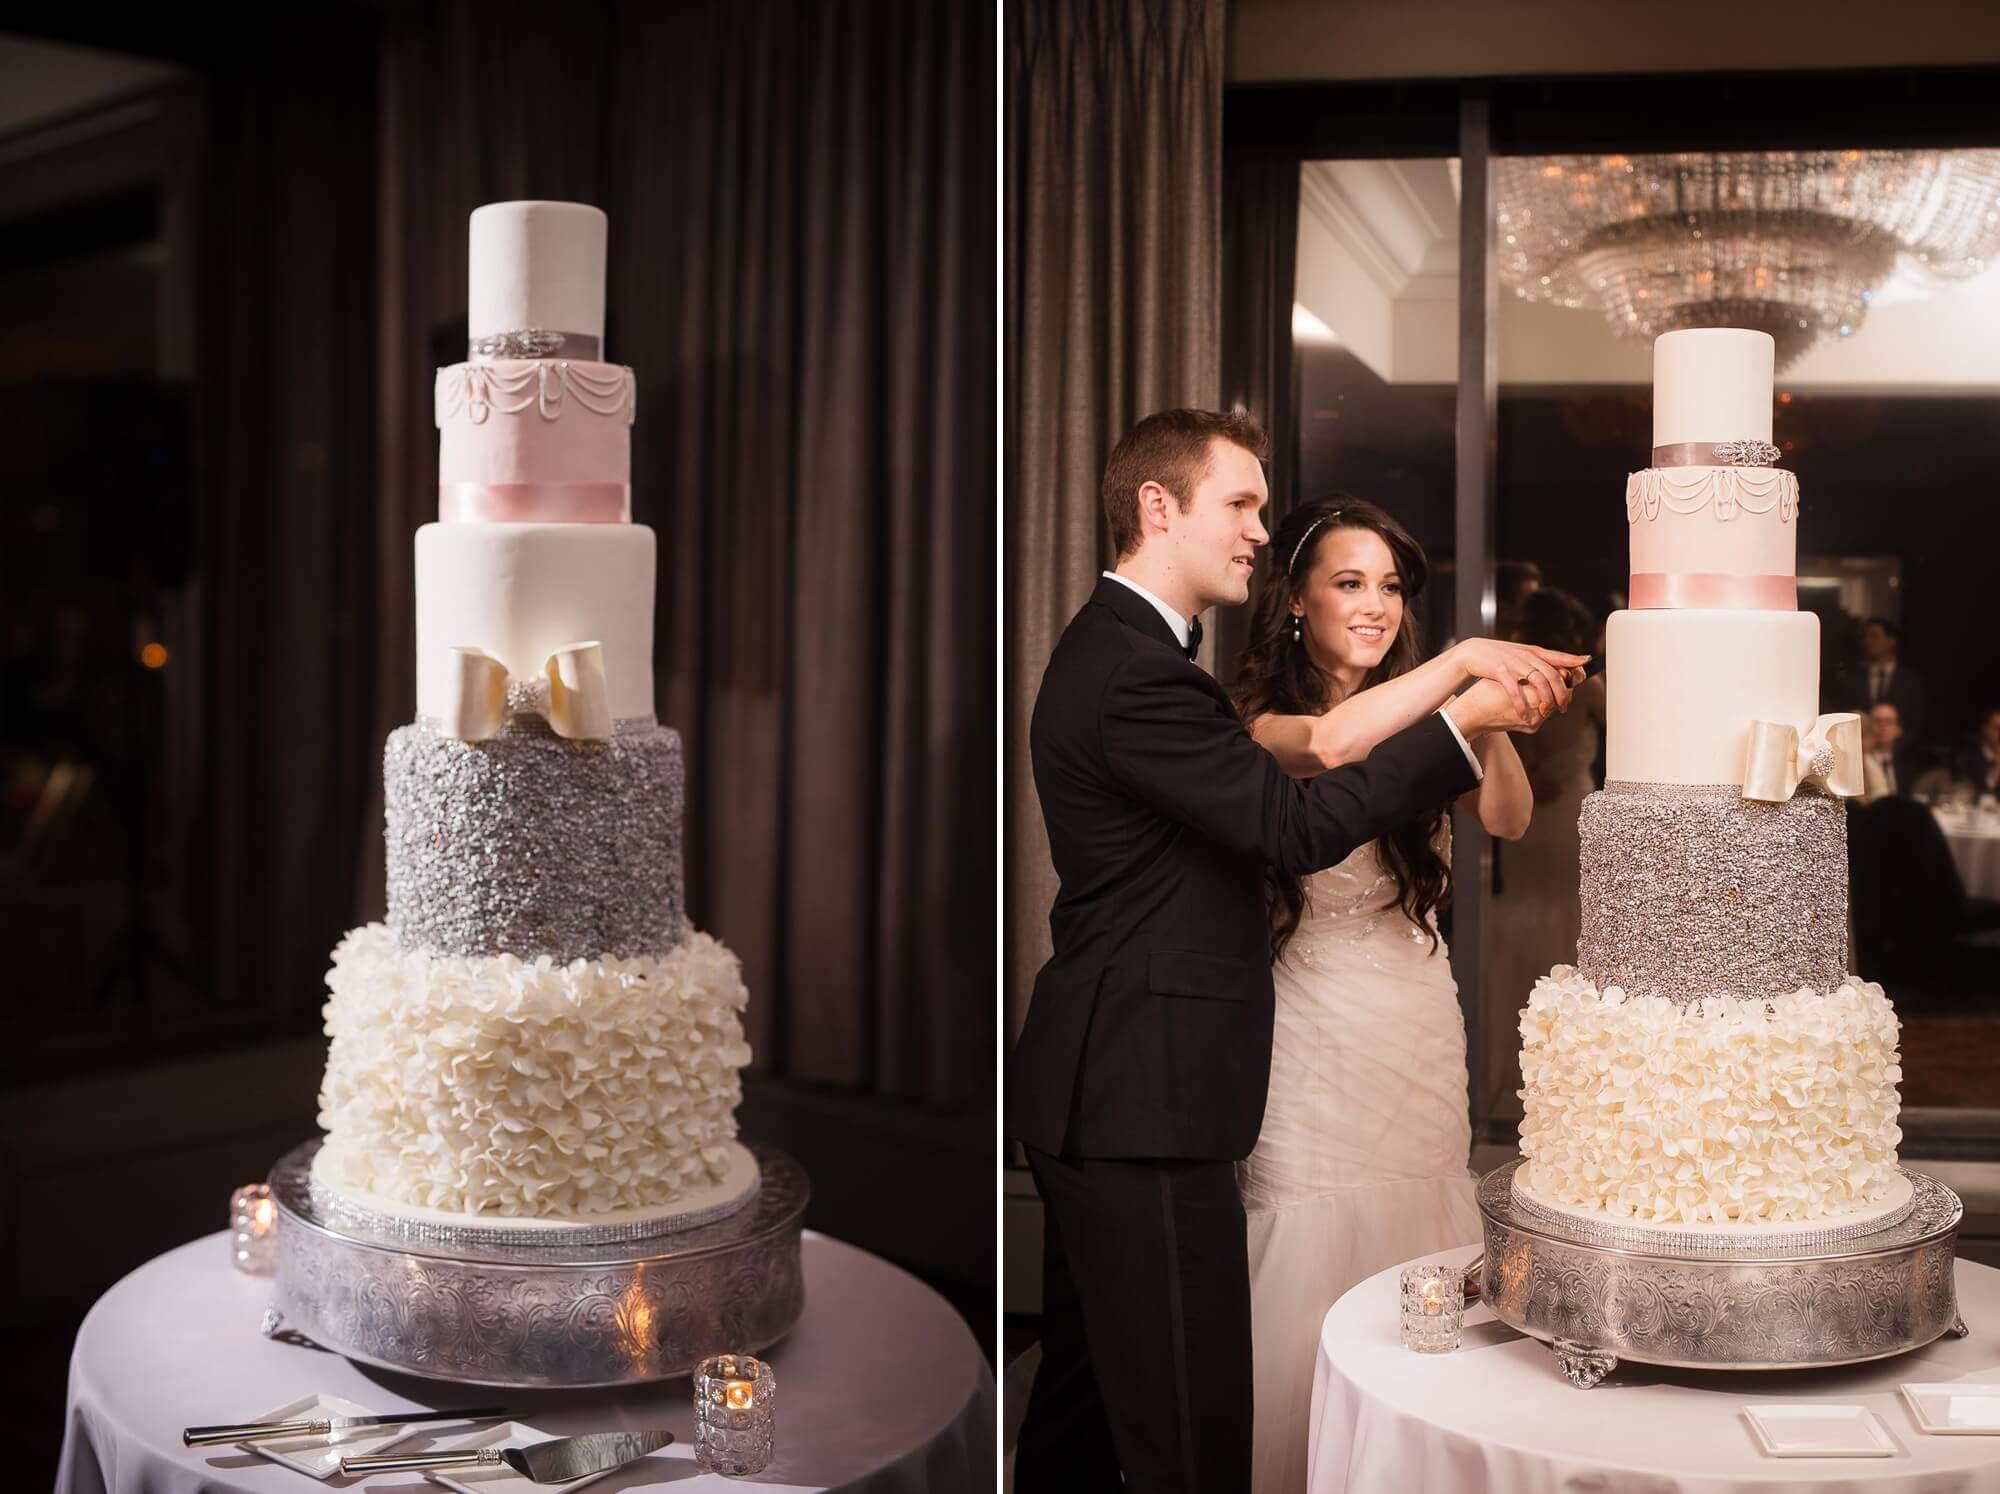 Details of the large 5 tier wedding cake as the bride and groom take their first slice at the Fairmont Royal York, Toronto 